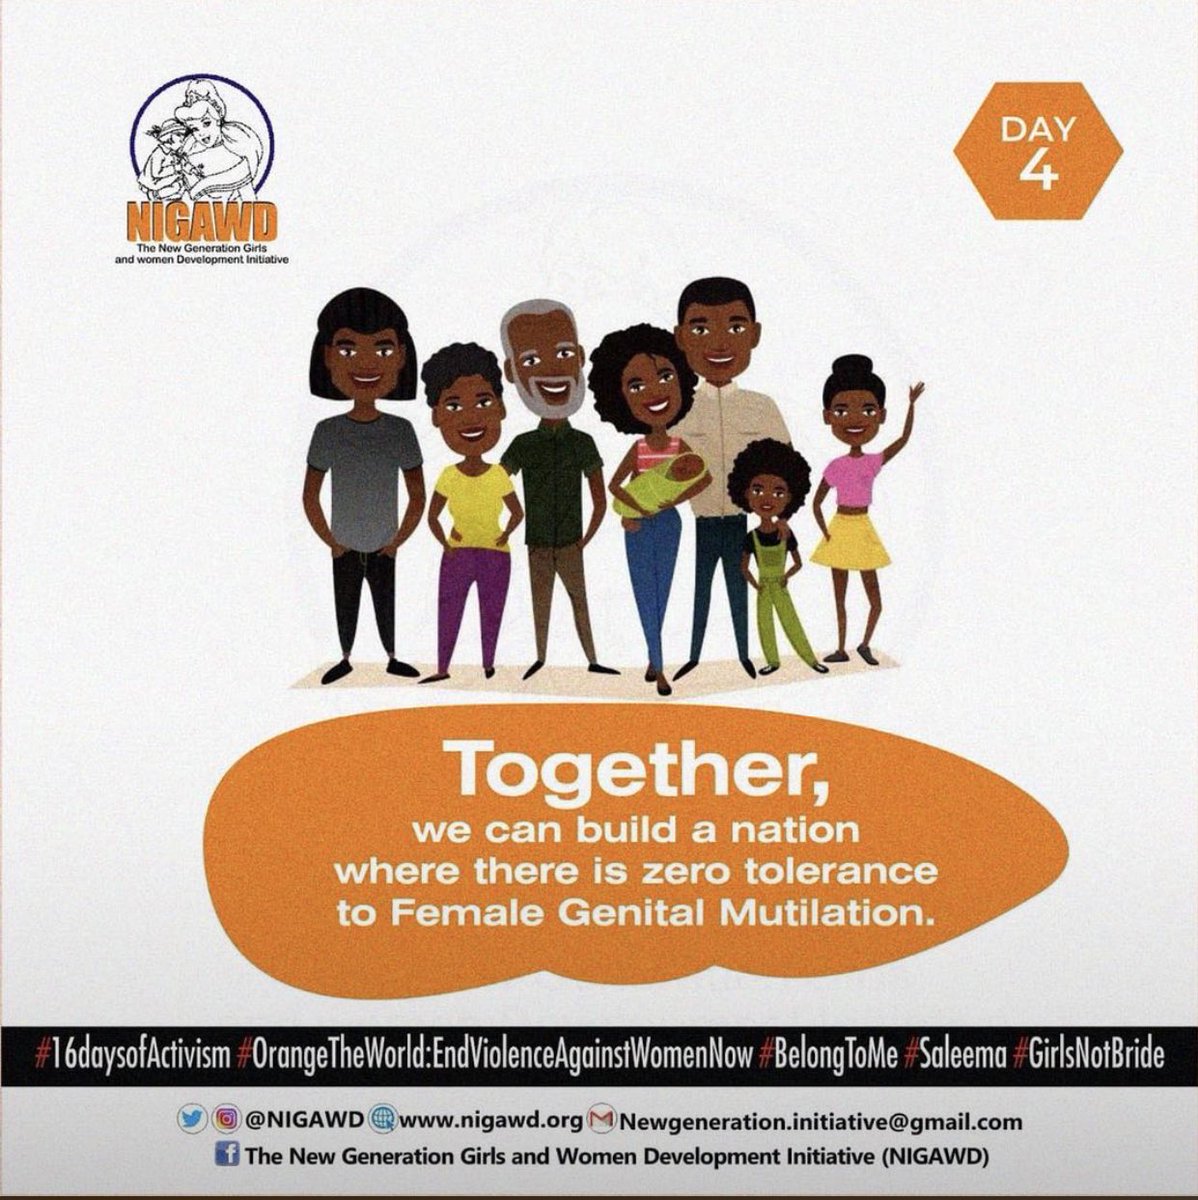 Let’s put an end to this act.
Let’s #StopFGM 
#16DaysofActivism2022